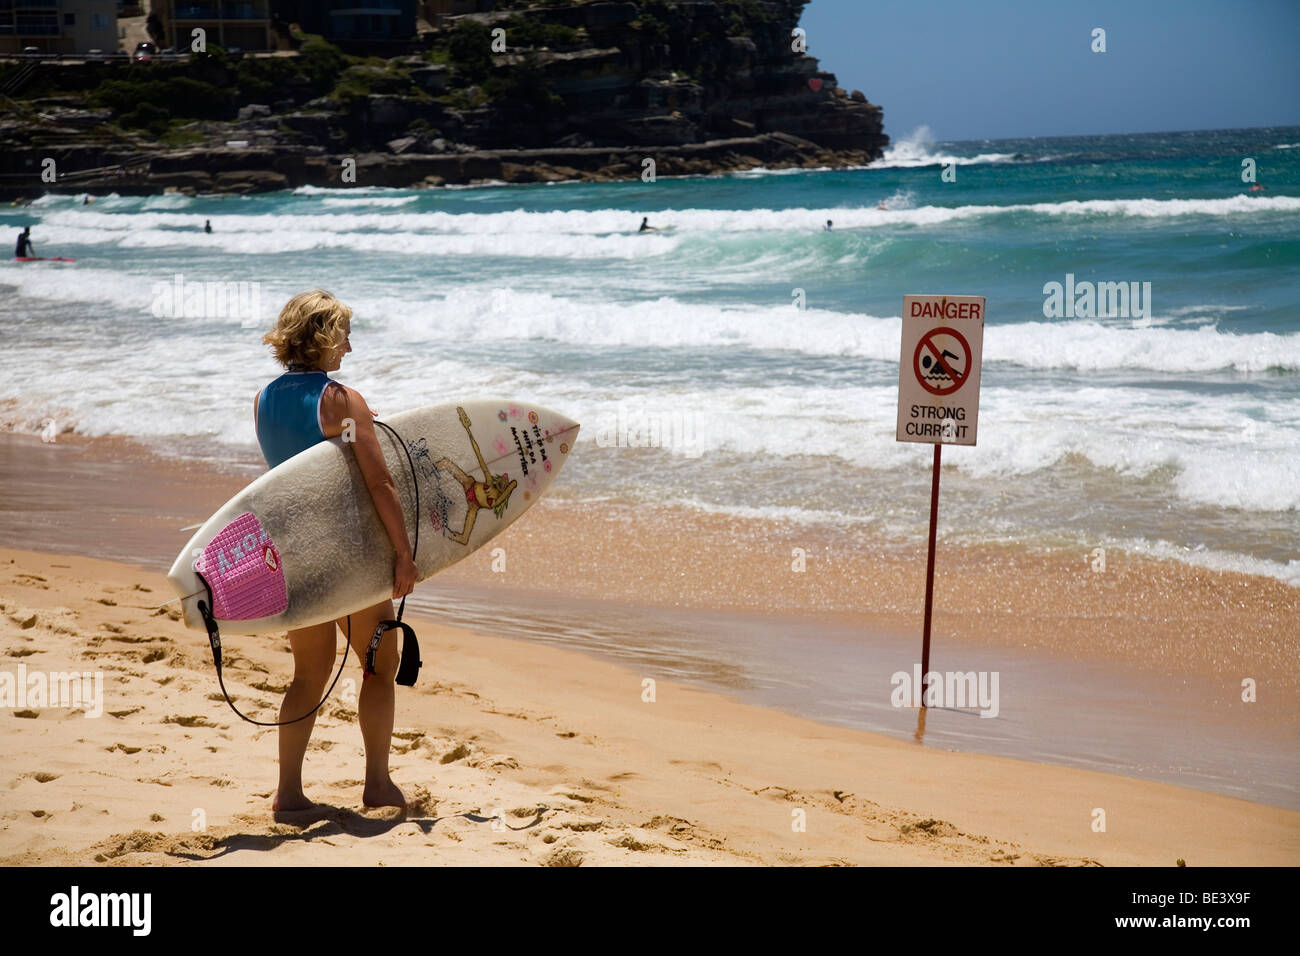 A female surfer looks out to the waves at Manly Beach. Sydney, New South Wales, AUSTRALIA Stock Photo